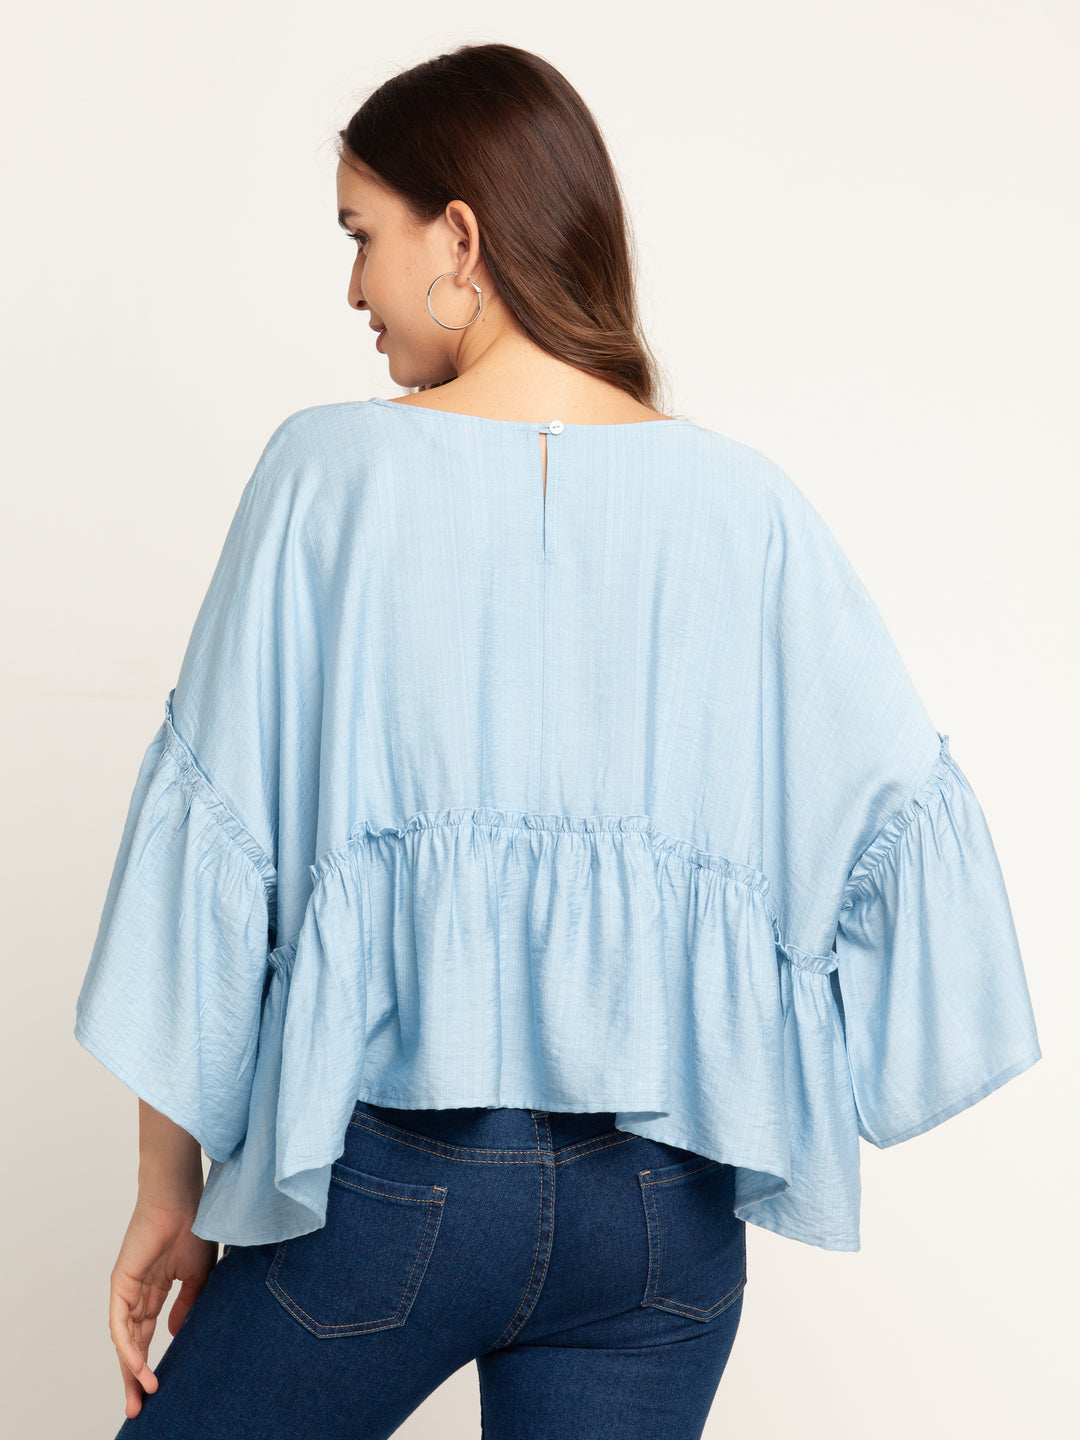 Blue Solid Tiered Top For Women